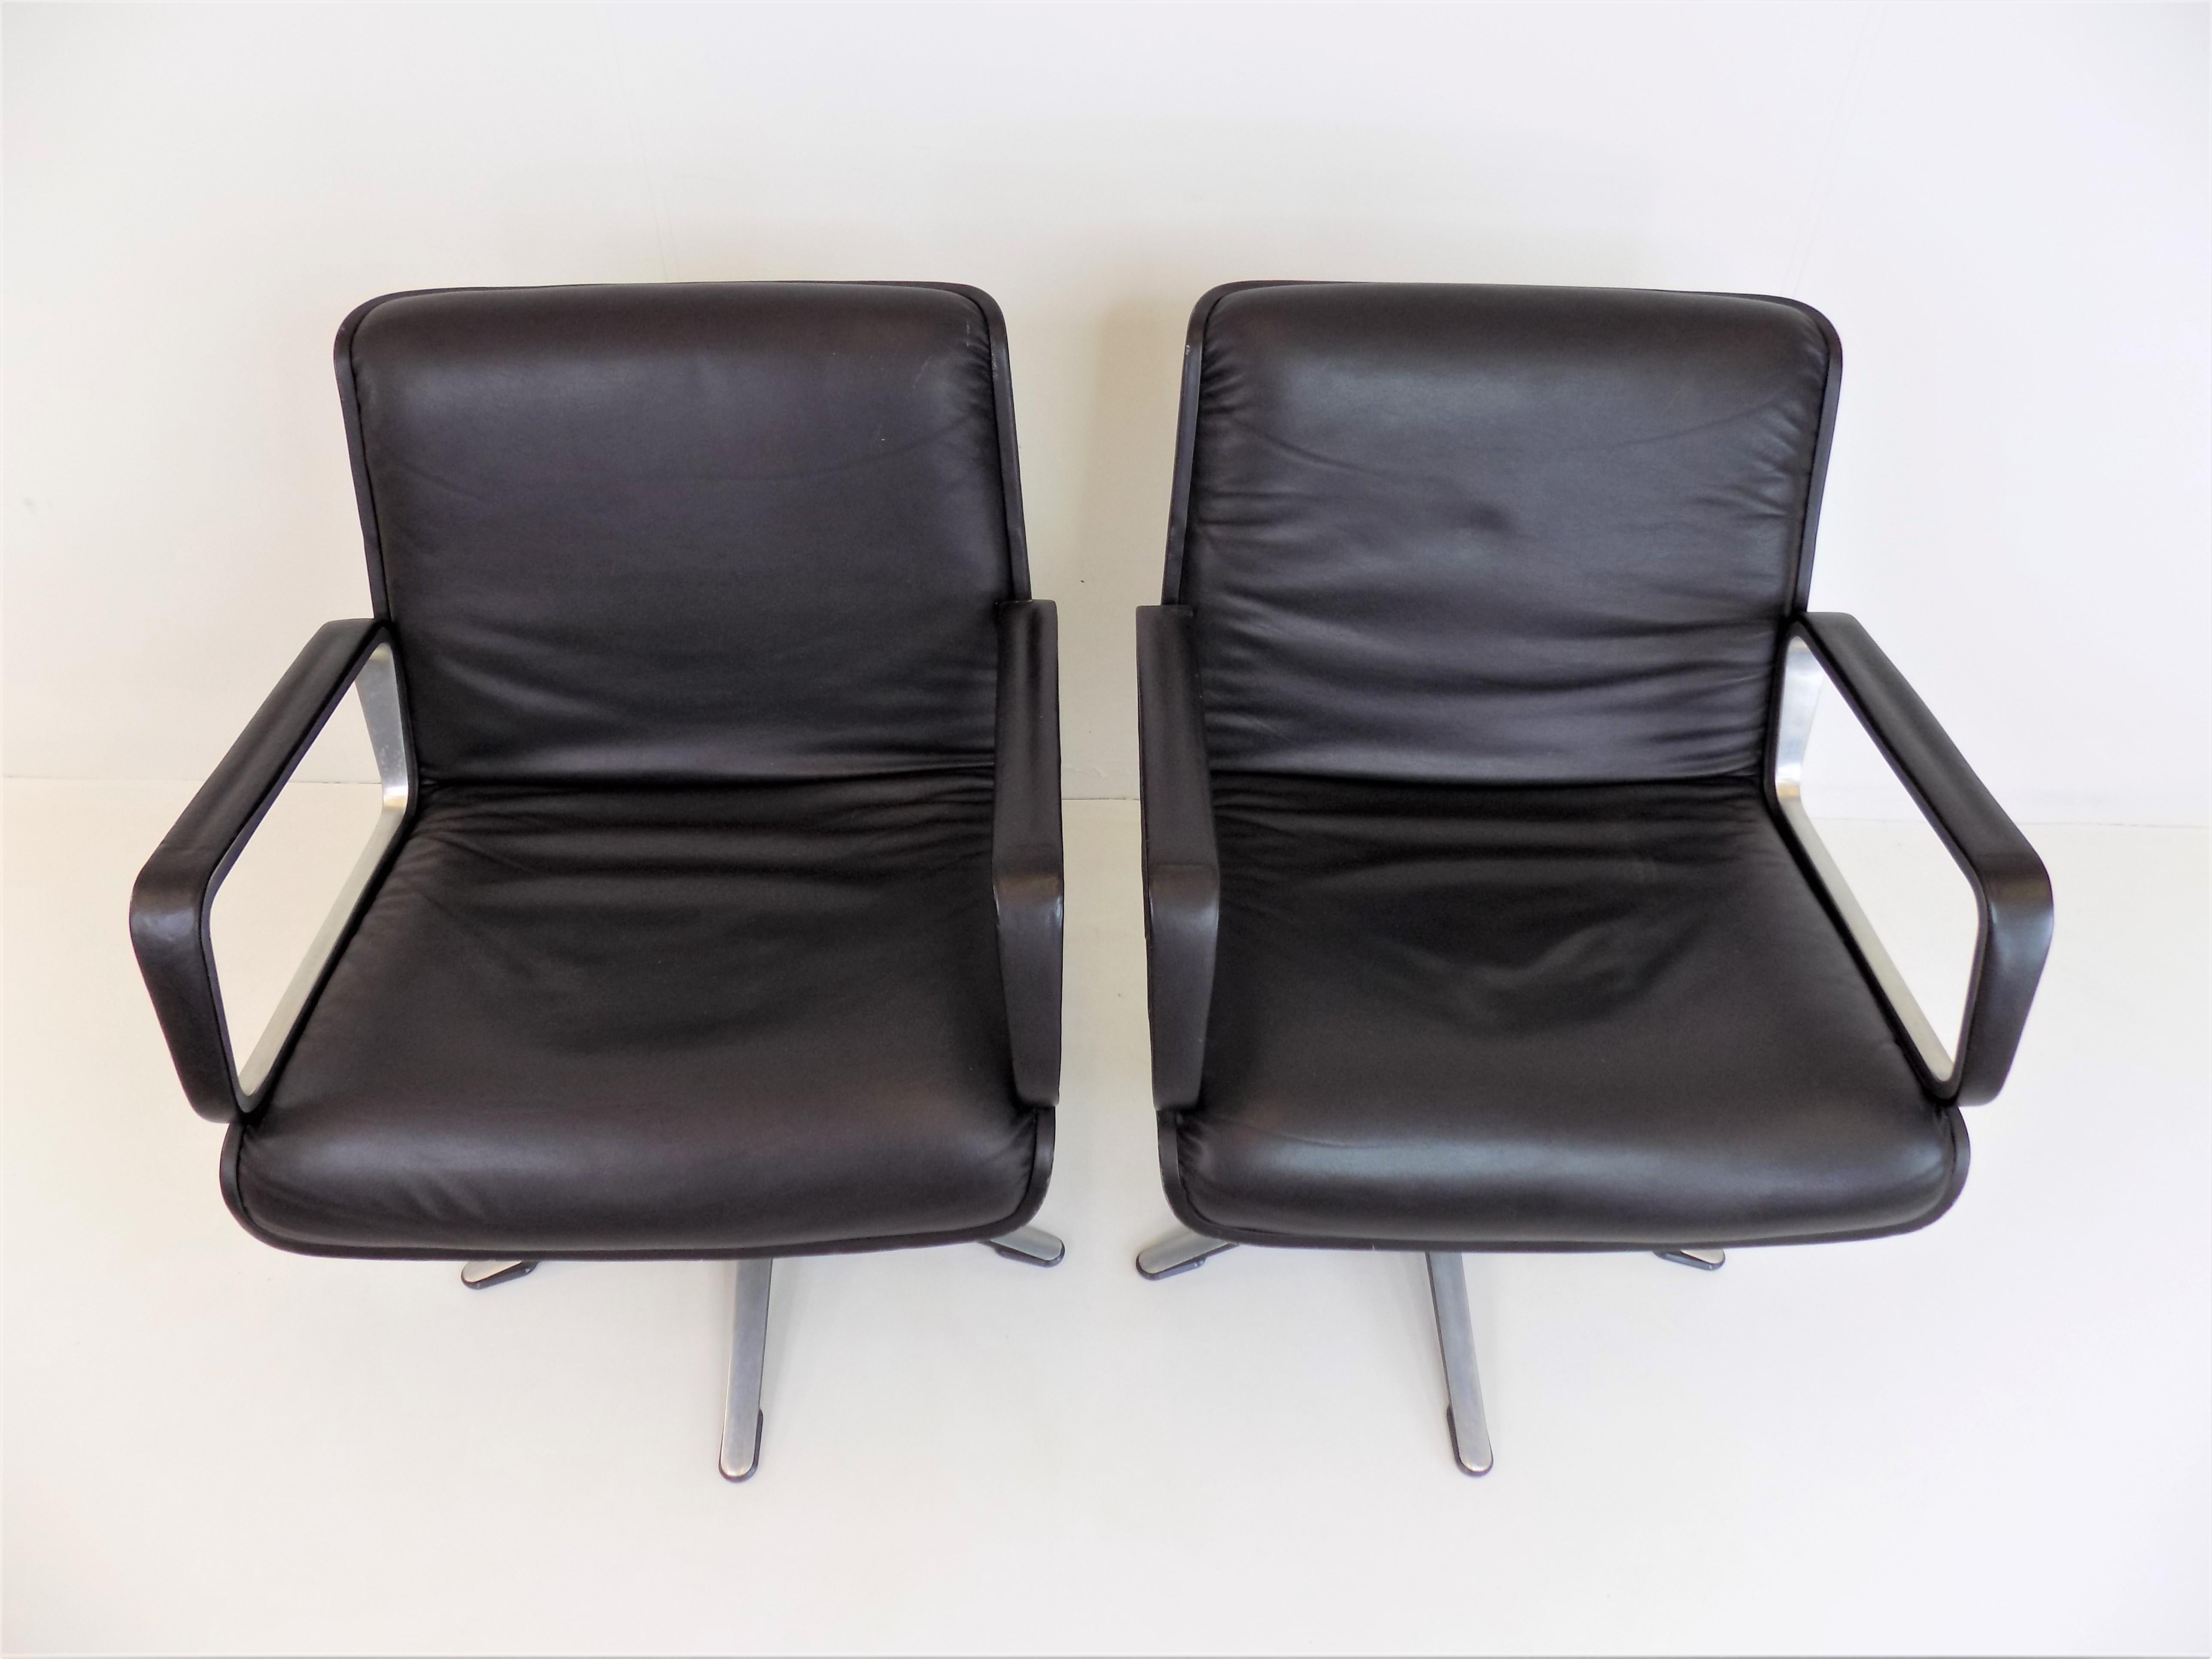 Wilkhahn Delta set of 2 dining/conference chairs from Delta Group 4